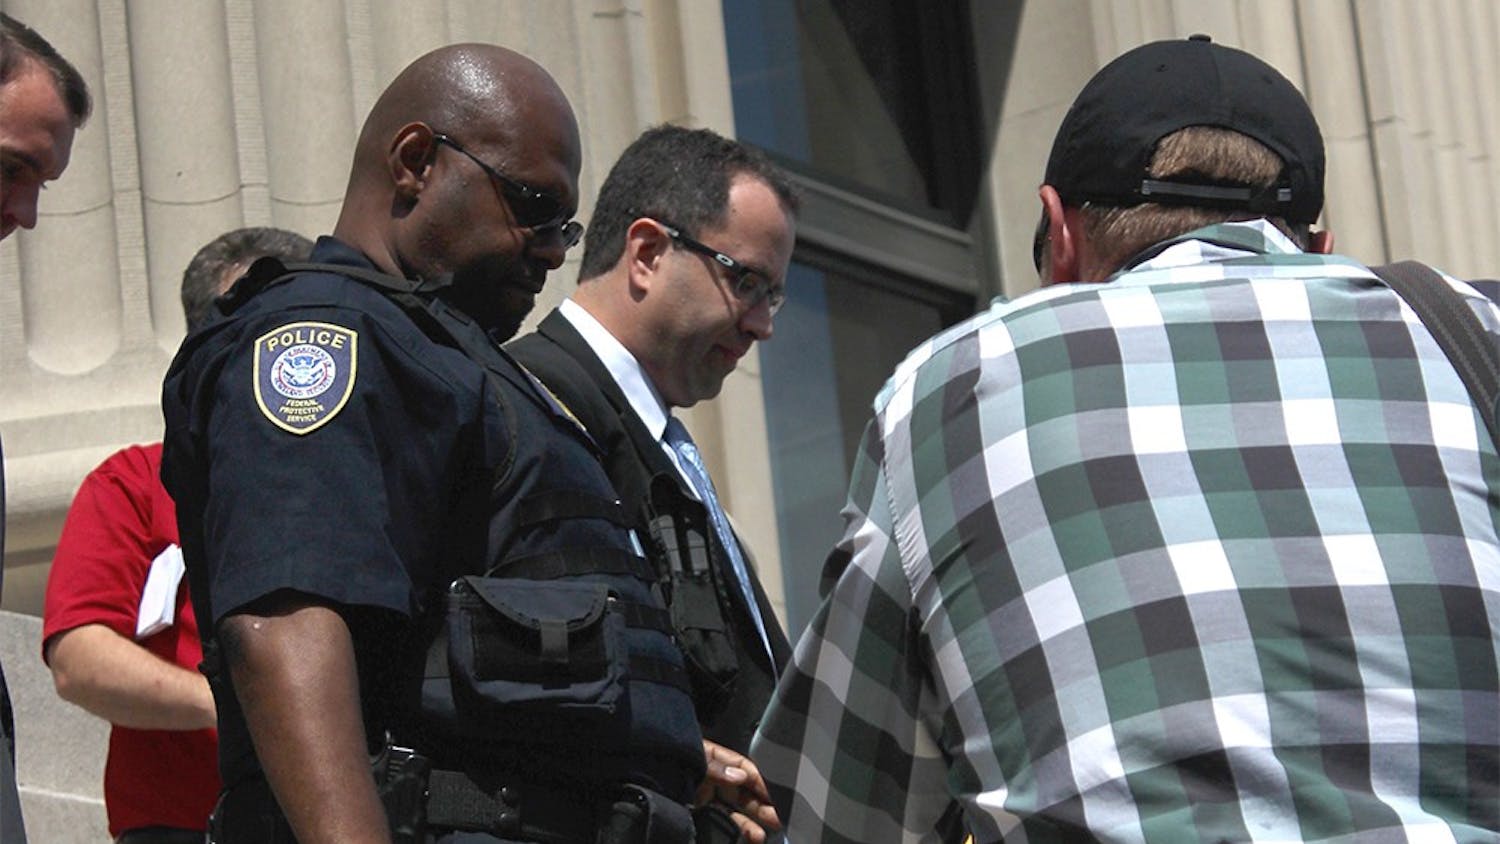 Jared Fogle leaves the federal courthouse in Indianapolis after his hearing on Wednesday. Fogle plead guilty to charges of distributing child pornography and paying for and engaging in sex acts with minors.